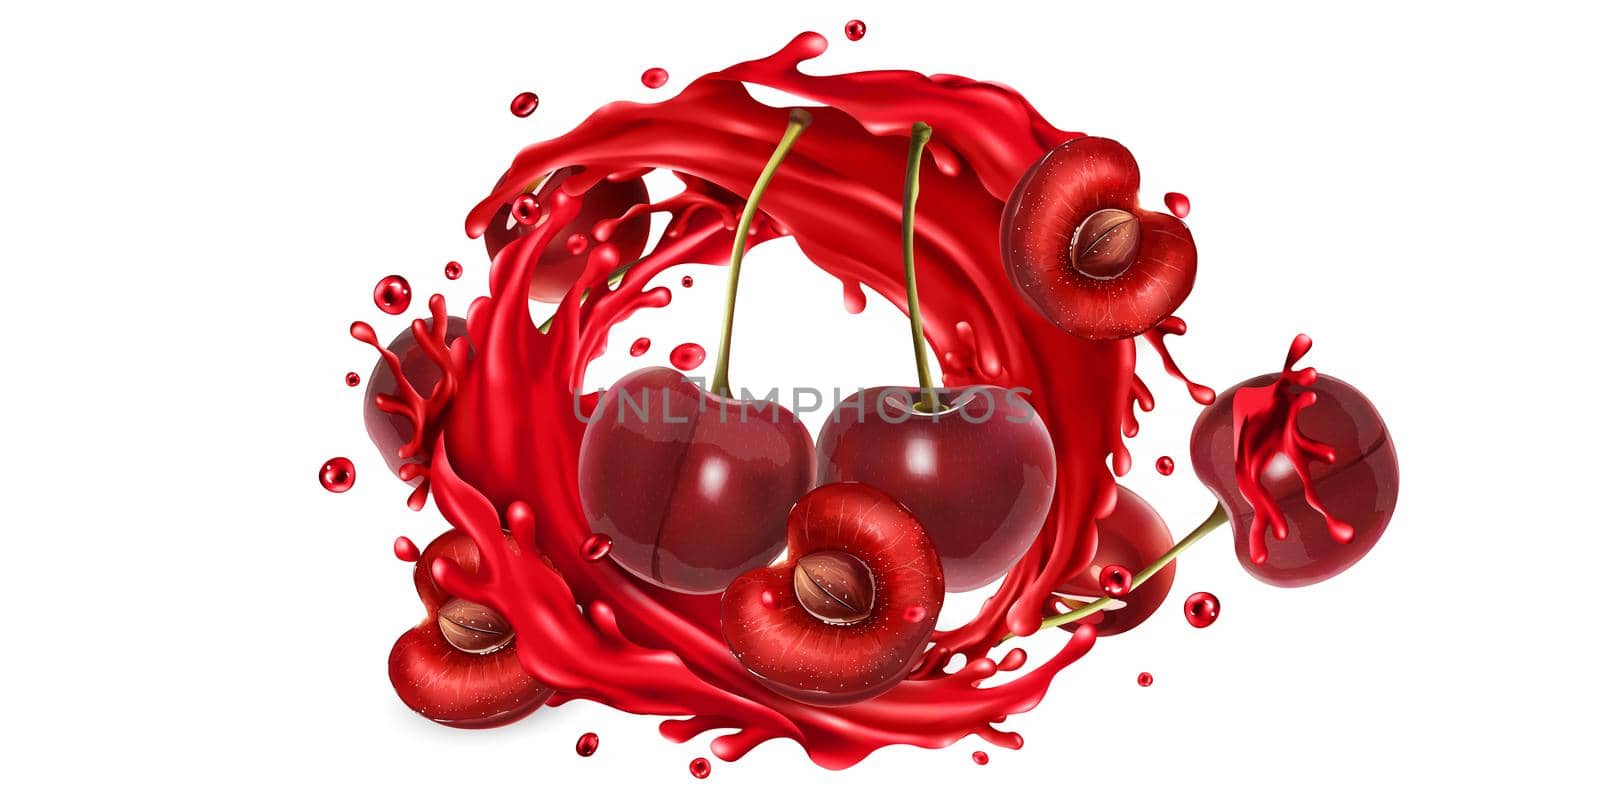 Fresh cherries and a splash of fruit juice on a white background. Realistic style illustration.